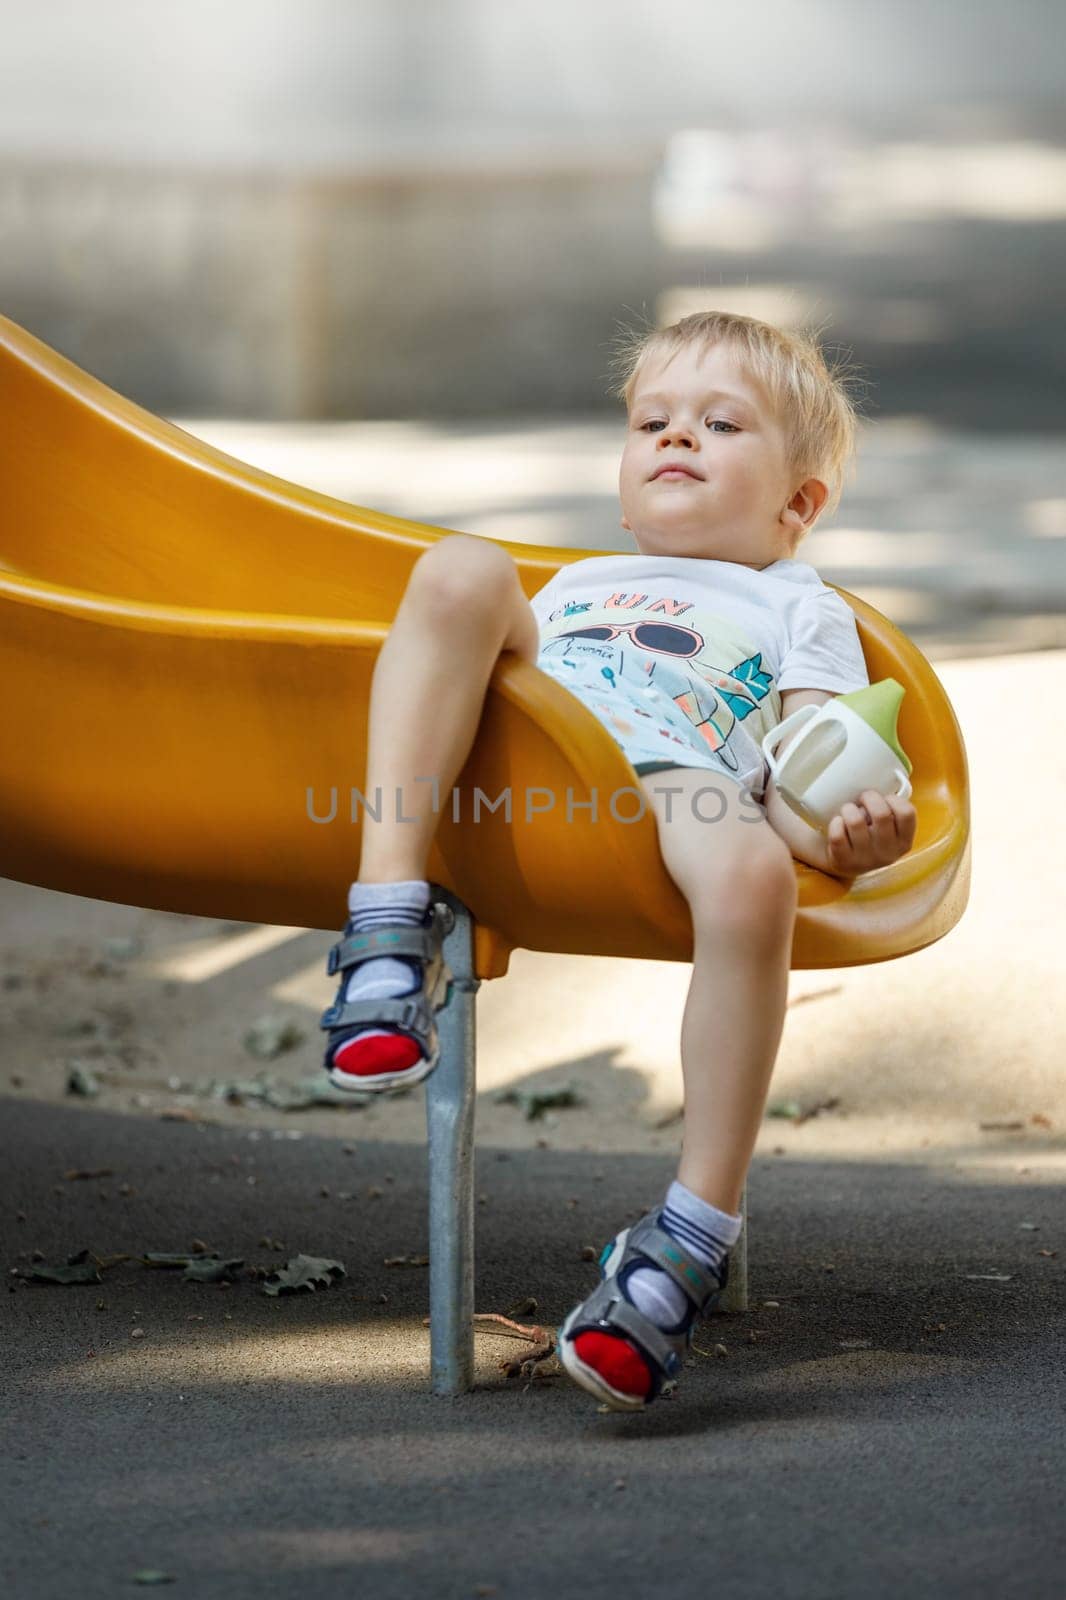 The little boy slips into a yellow plastic slide, his hair becomes eclectic, child sits down comfortably to calm and drink. by Lincikas